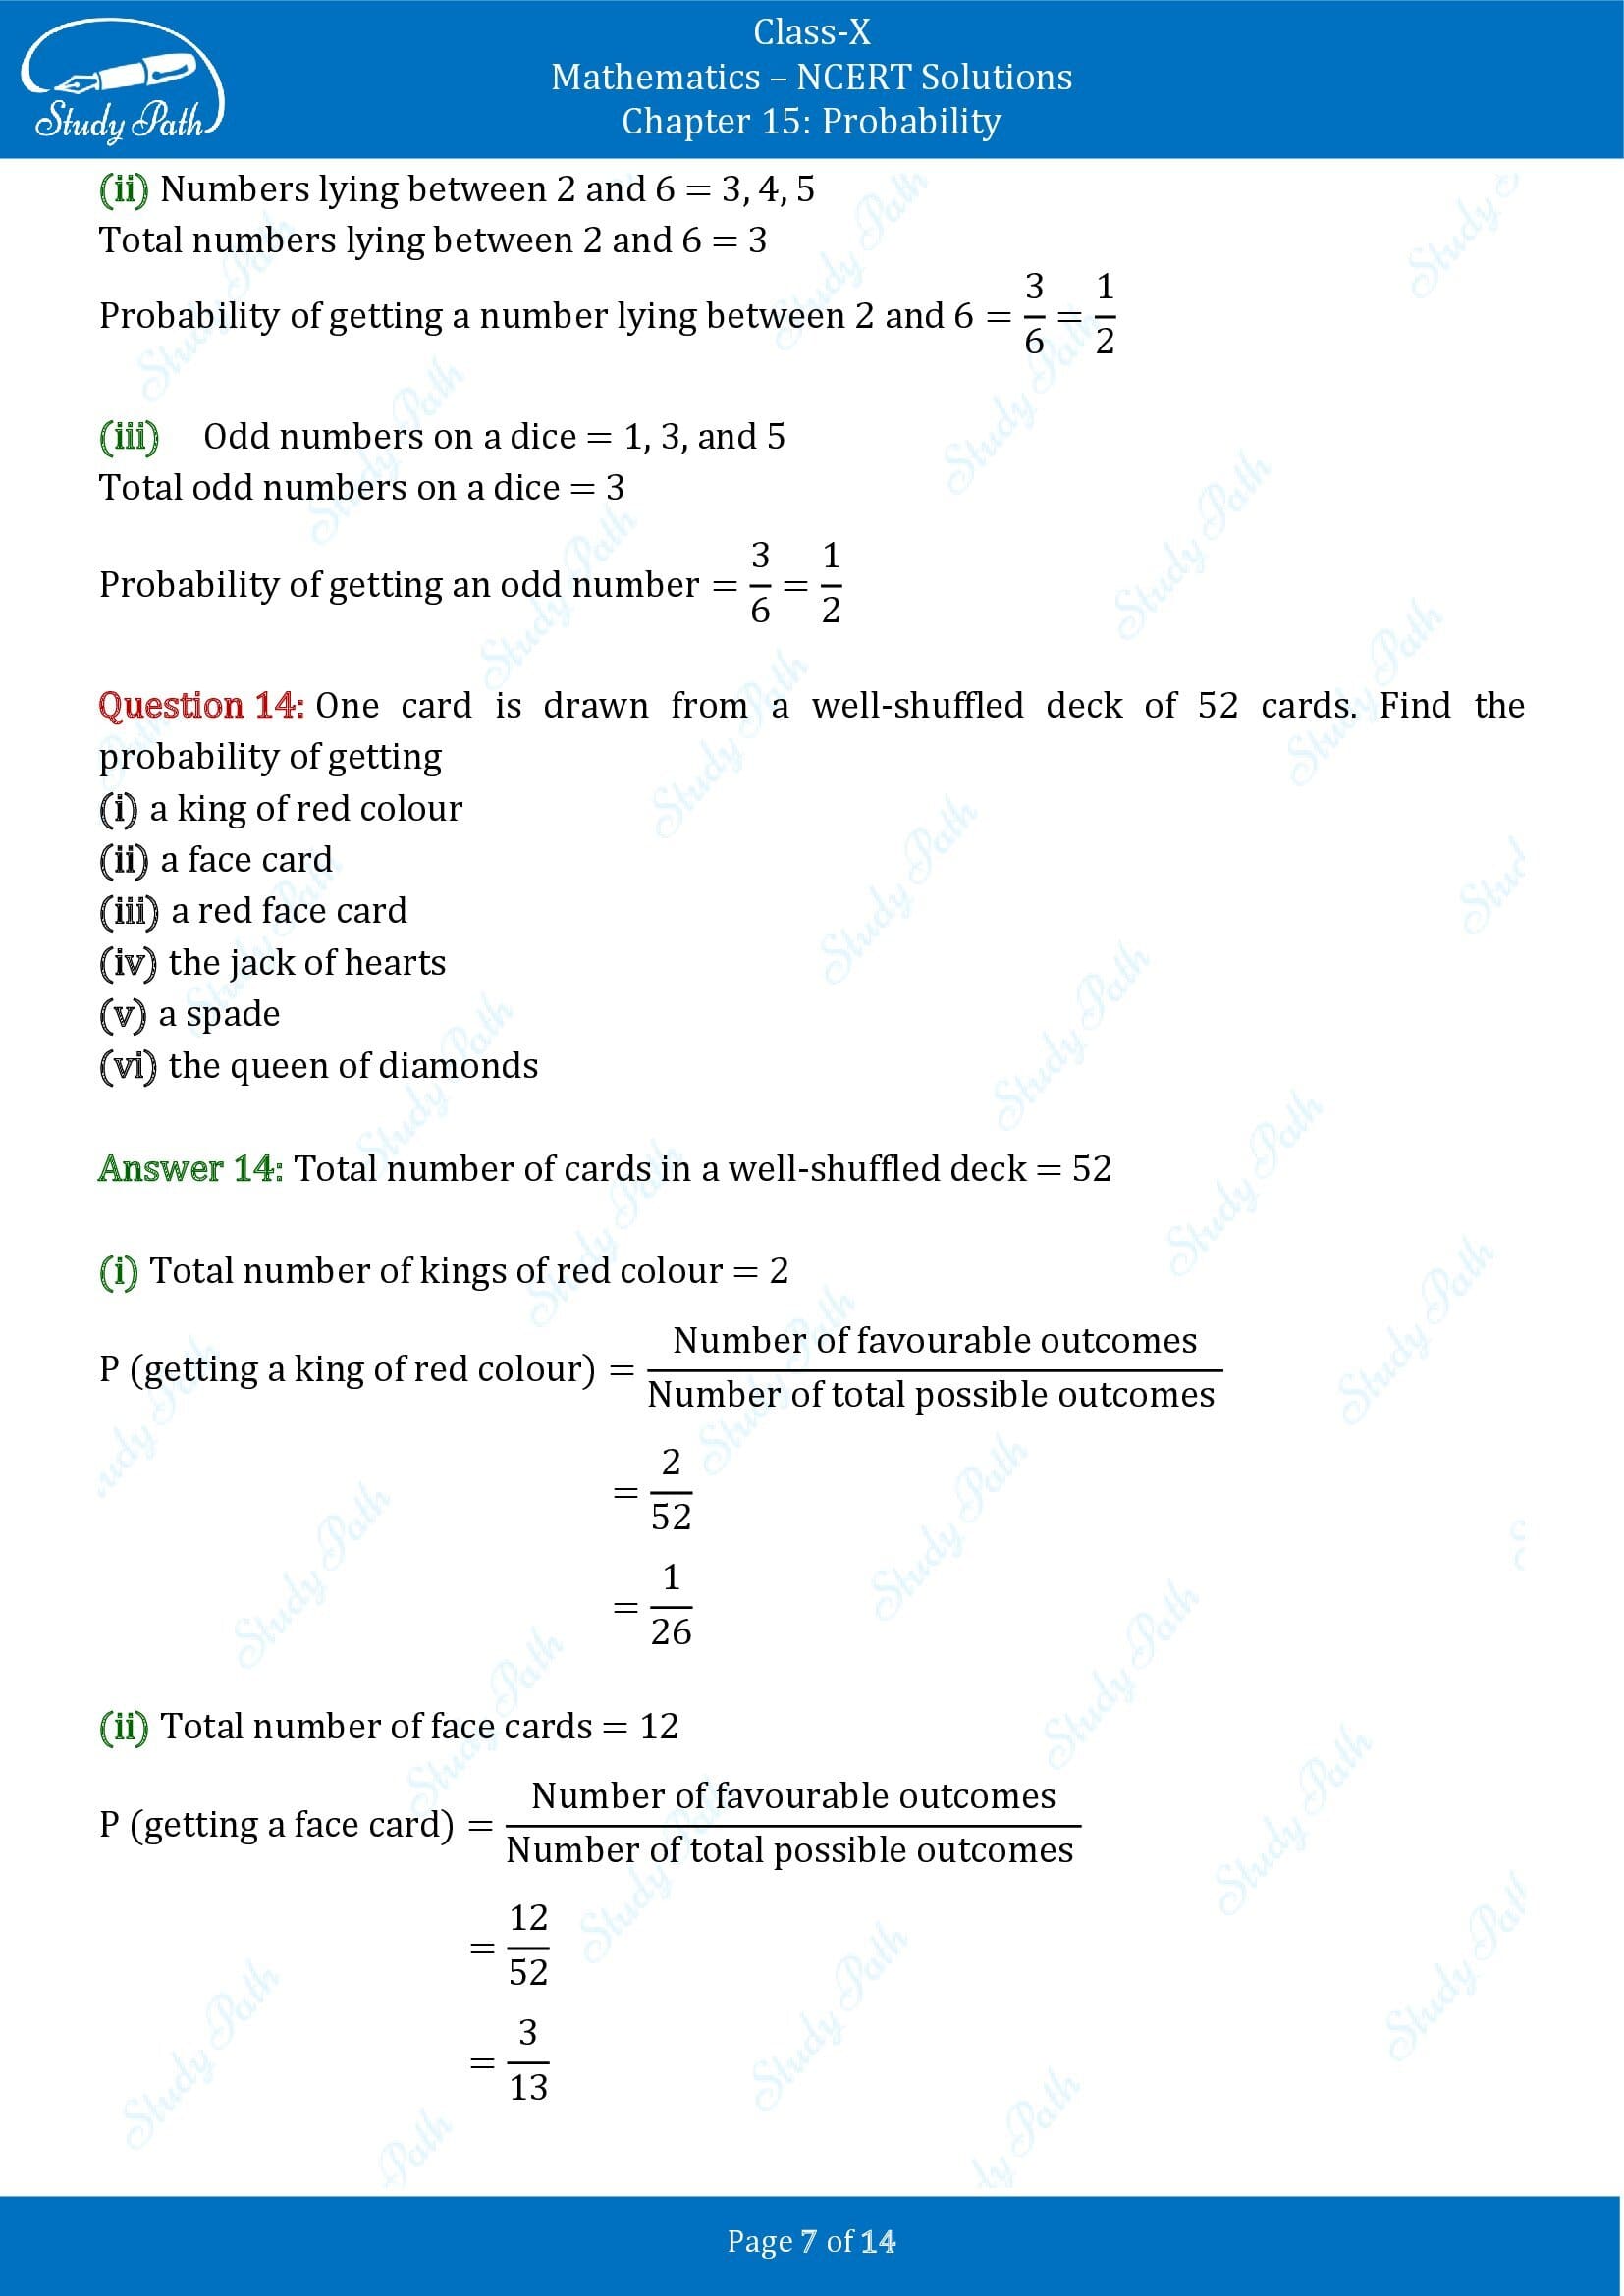 NCERT Solutions for Class 10 Maths Chapter 15 Probability Exercise 15.1 00007